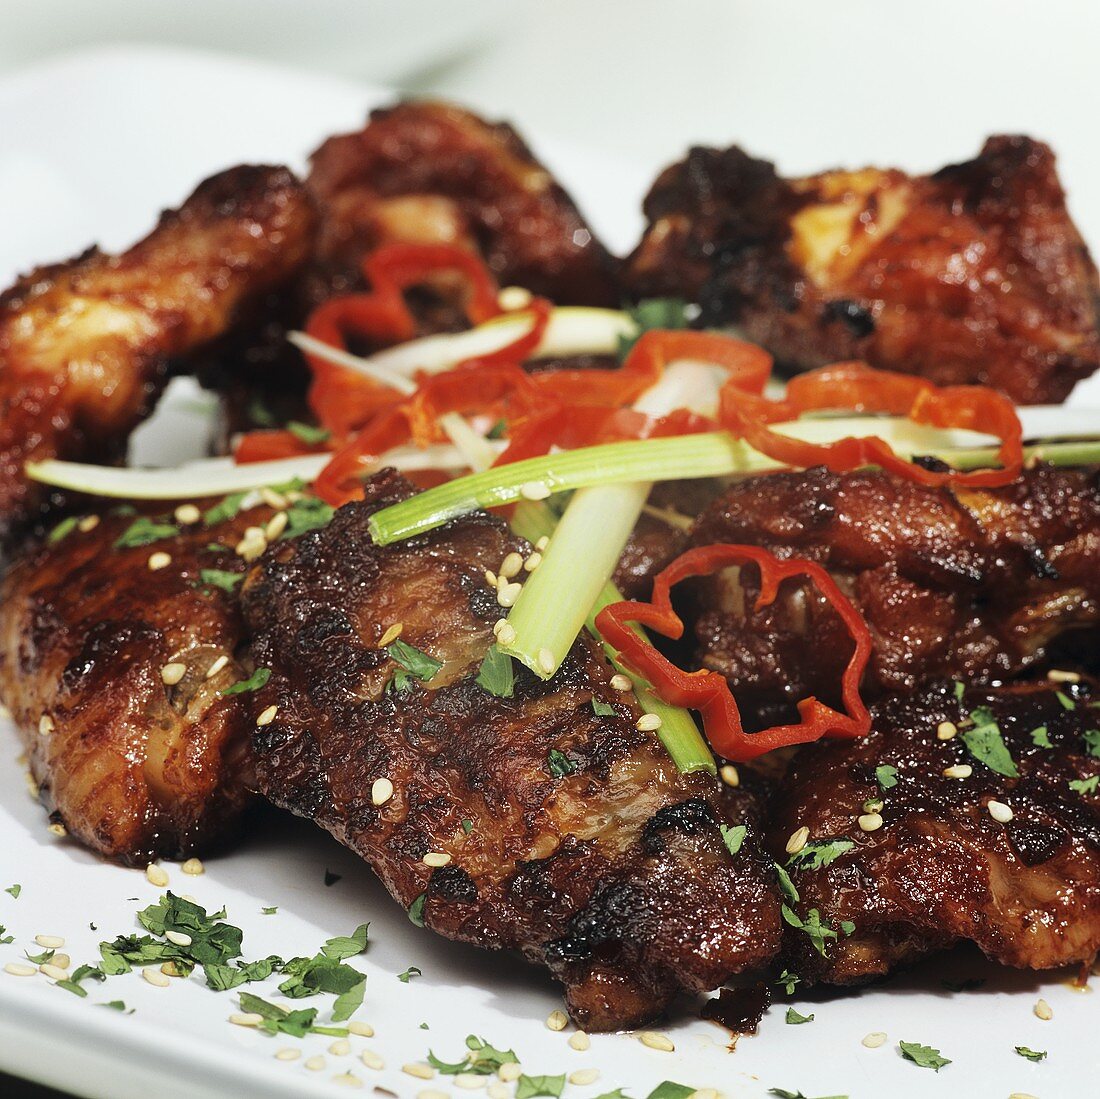 Spicy Korean-style chicken wings